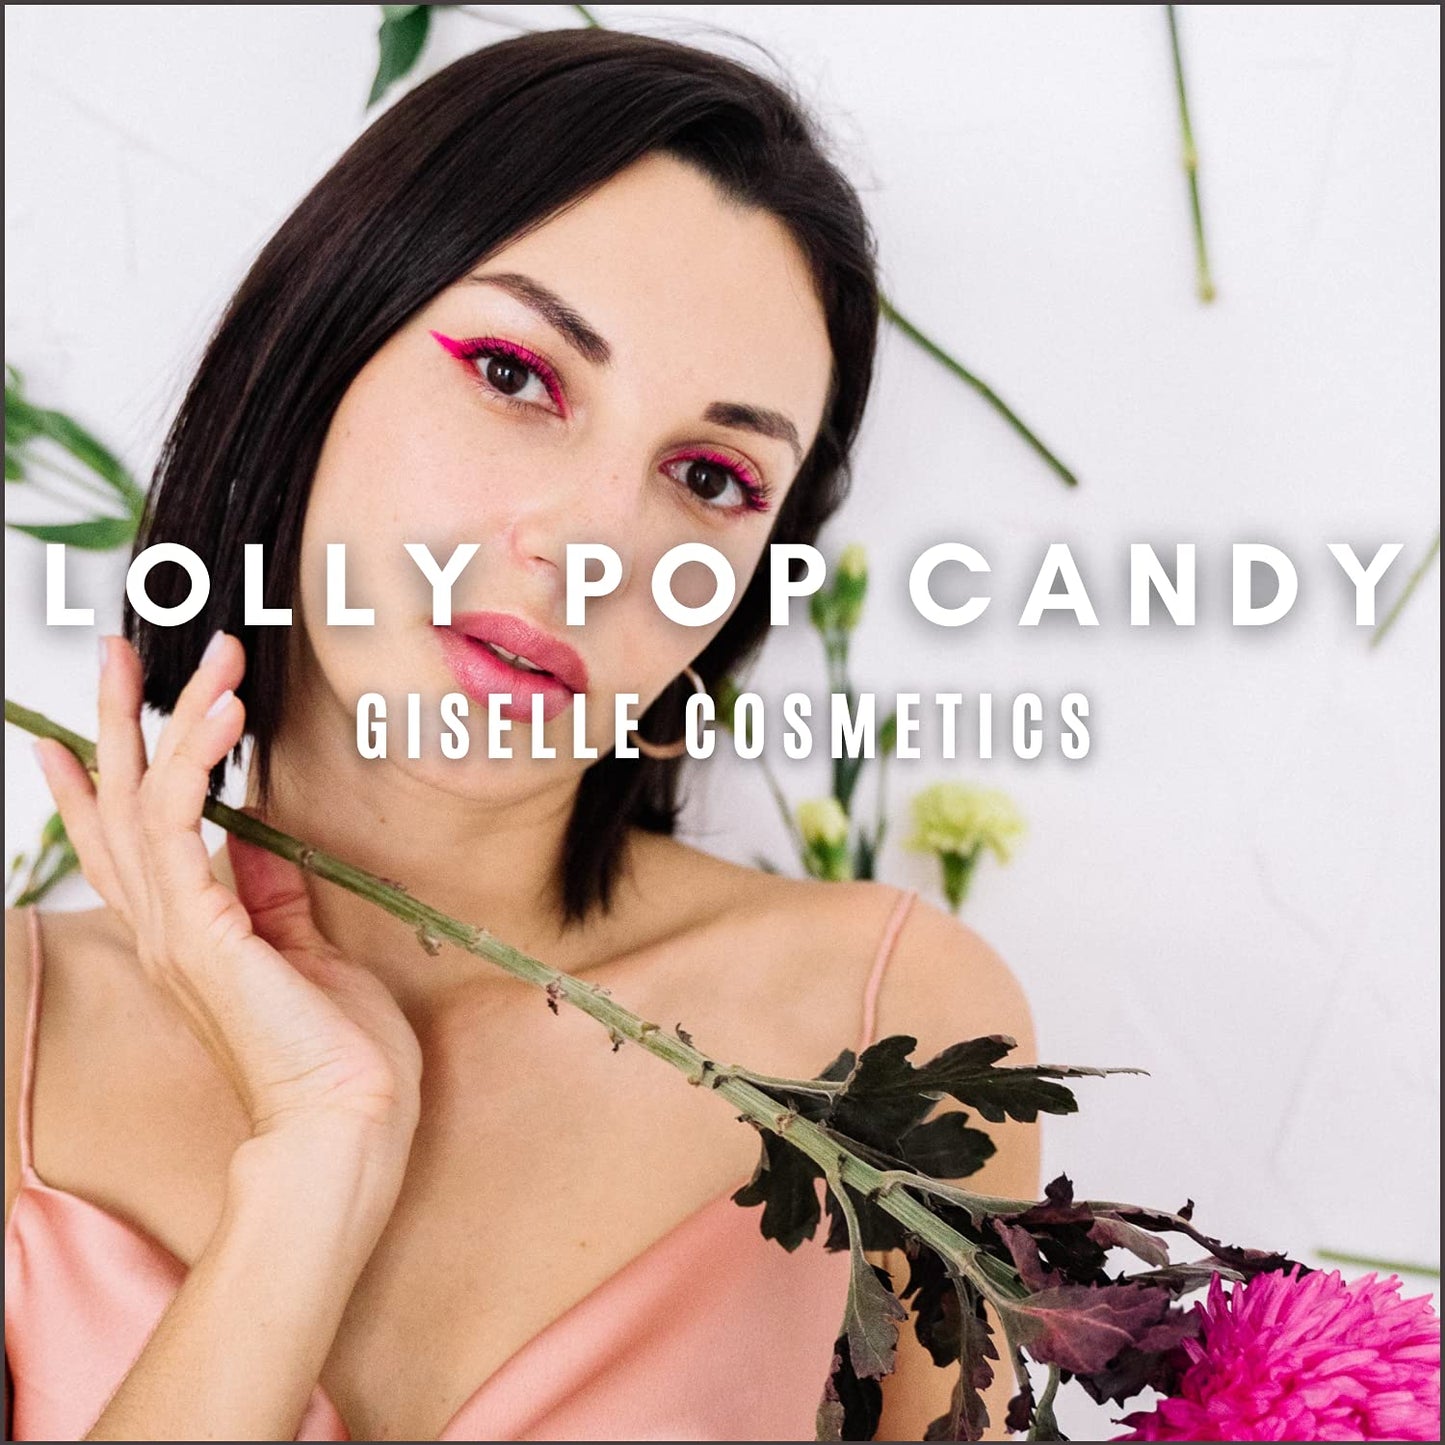 Lolly-Pop Candy